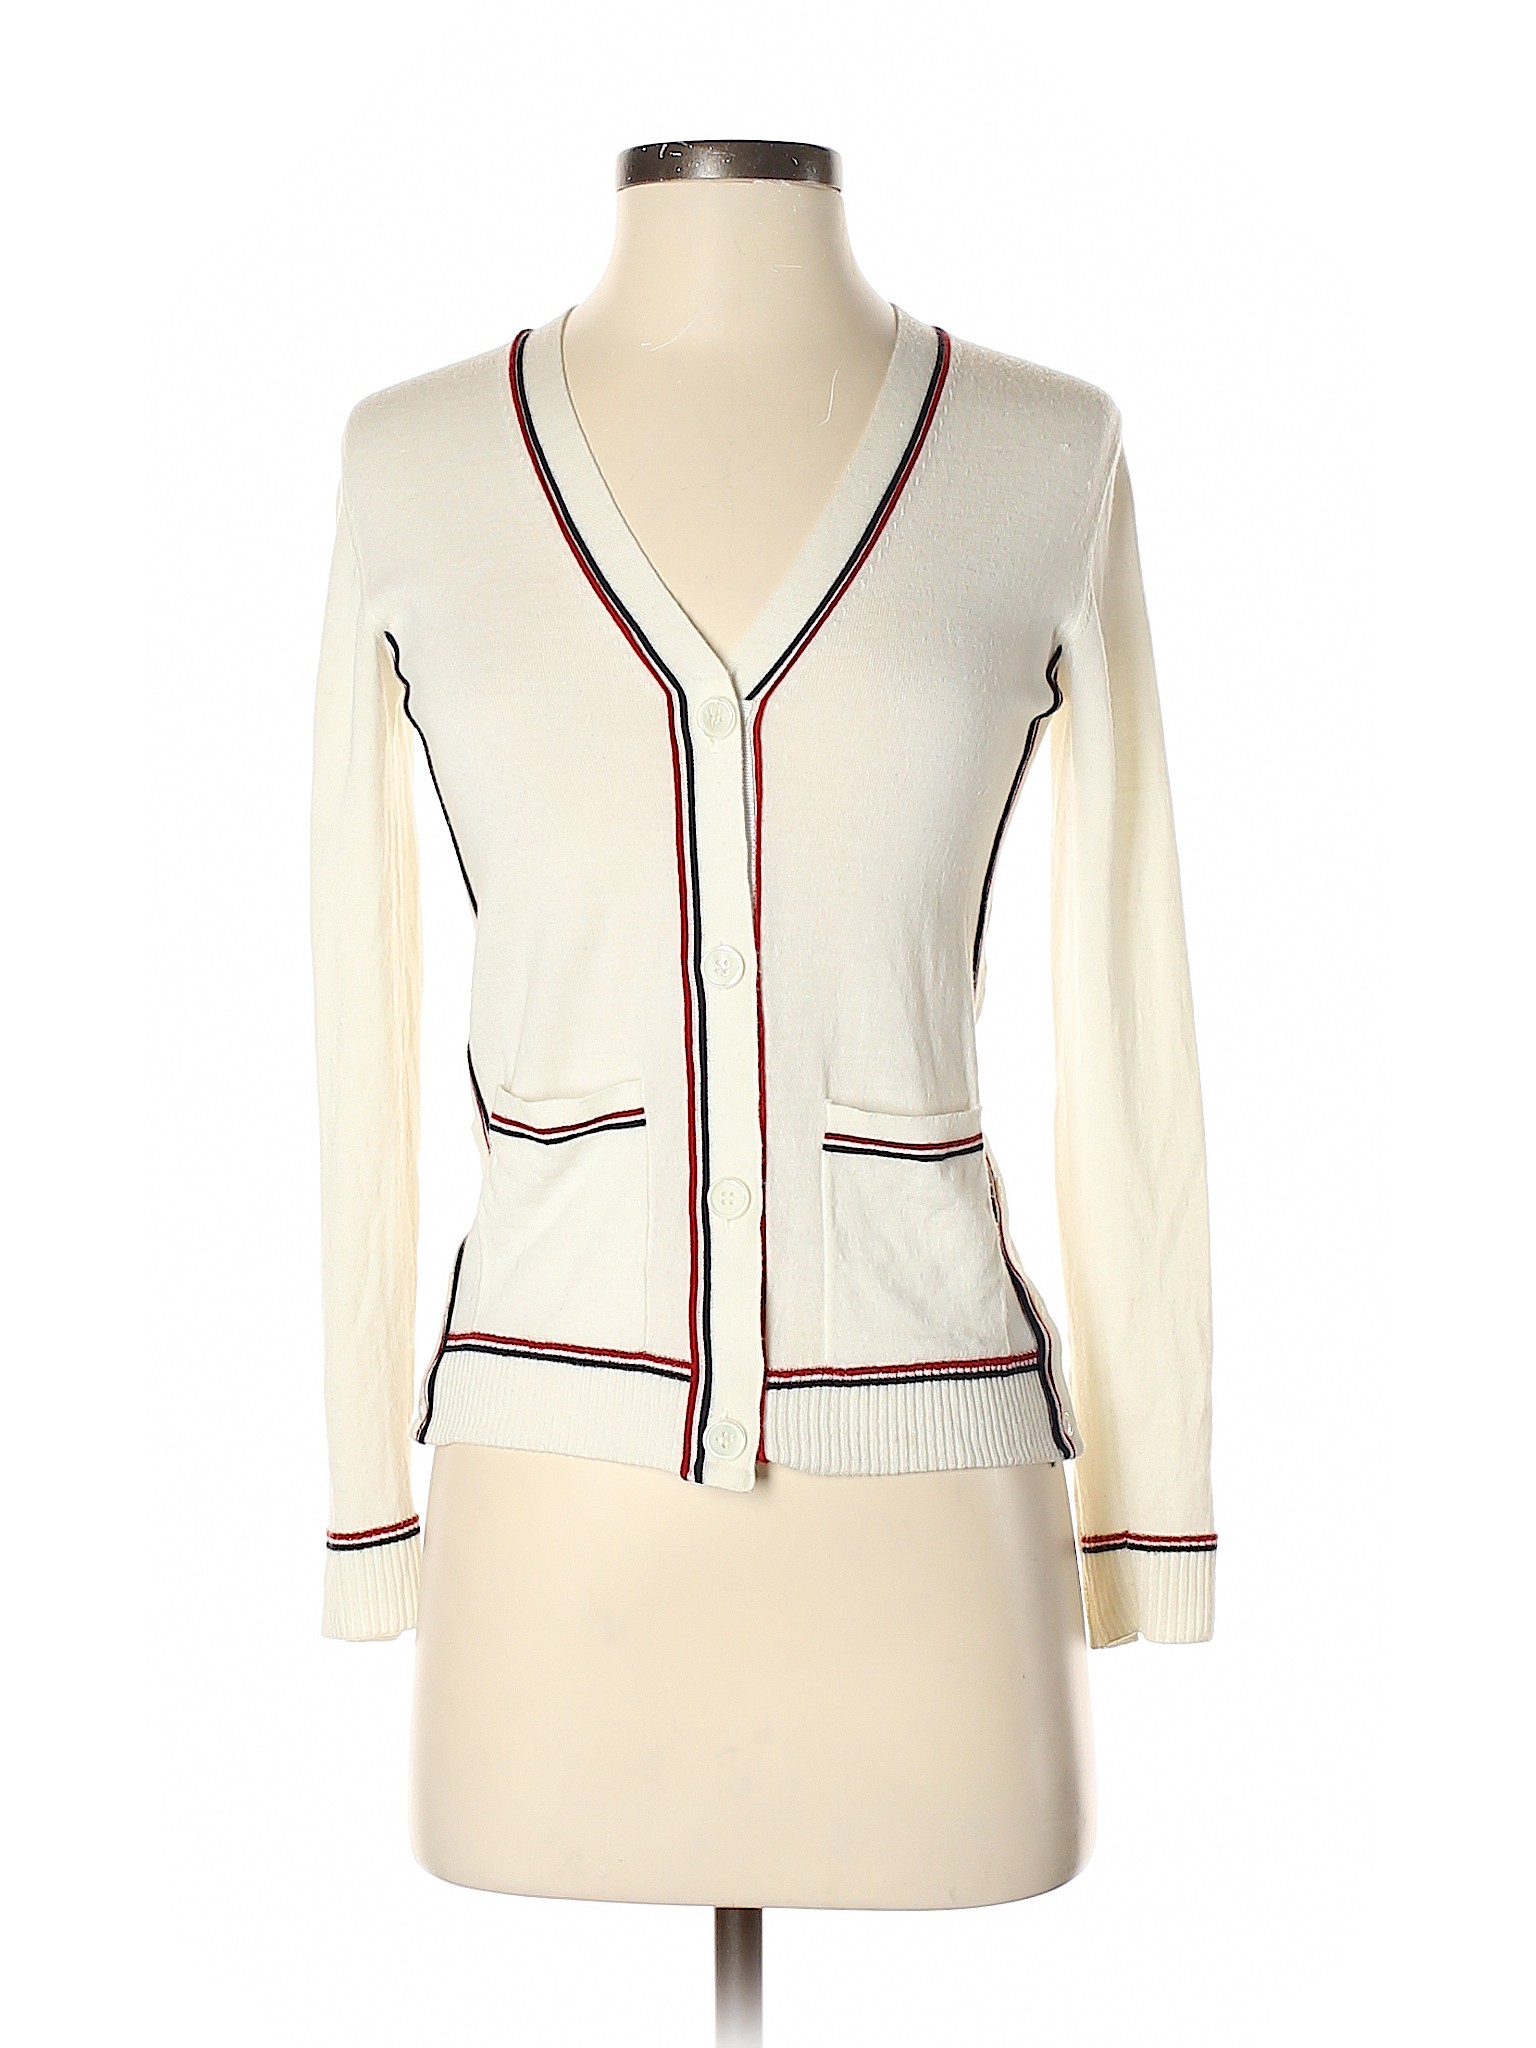 Details about Thom Browne Women Ivory Wool Cardigan 38 italian